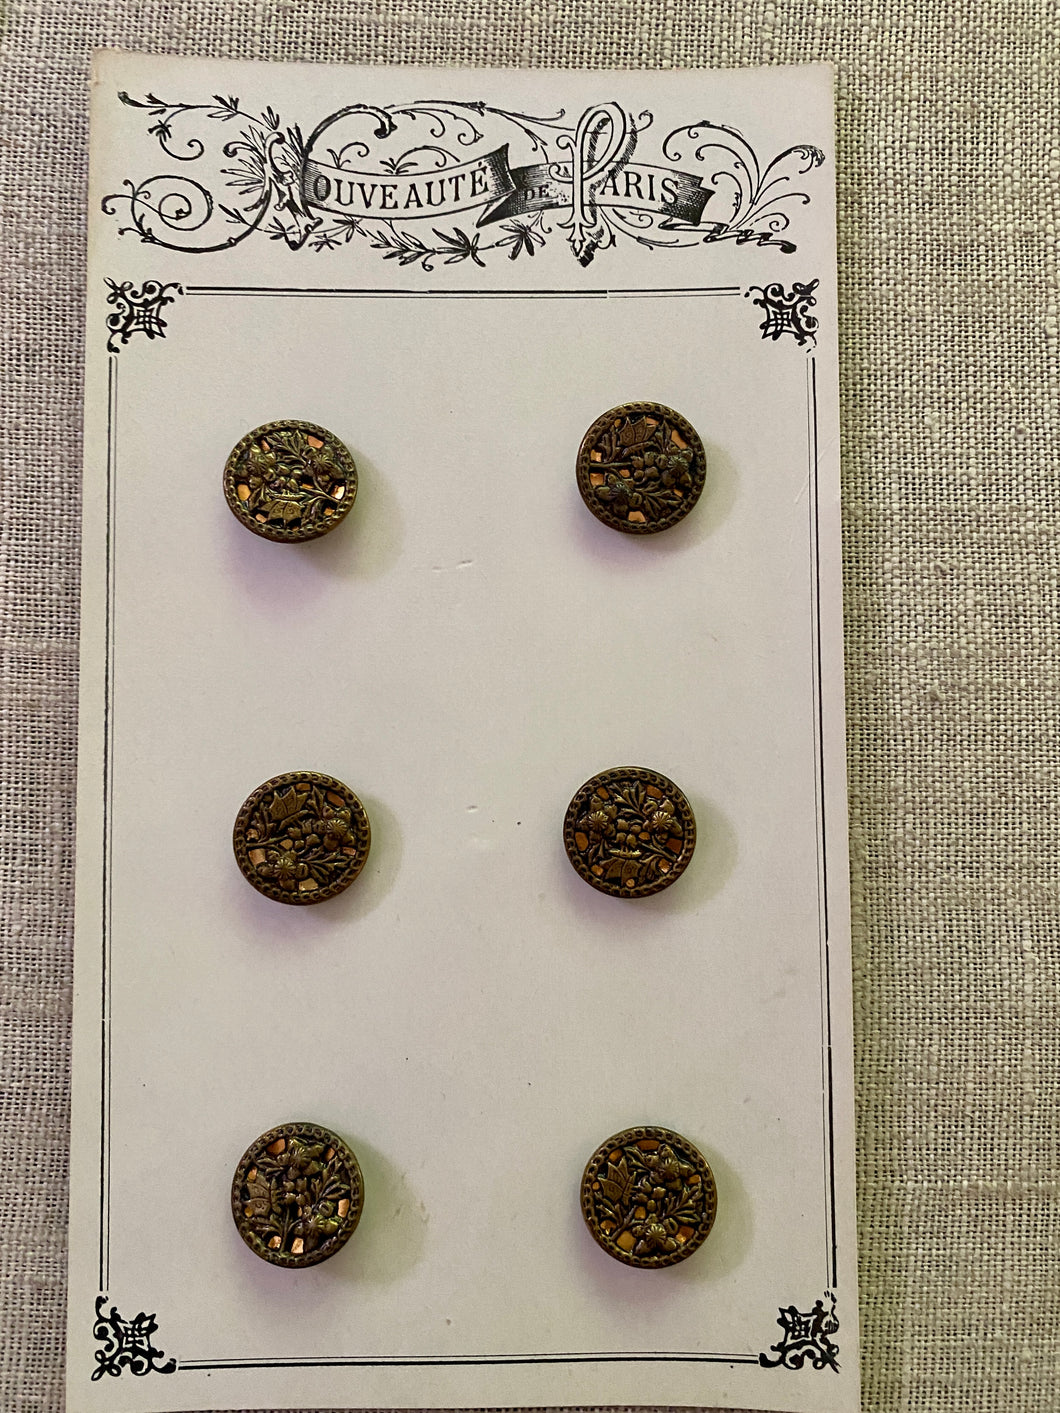 Antique Sets Of Metal Buttons